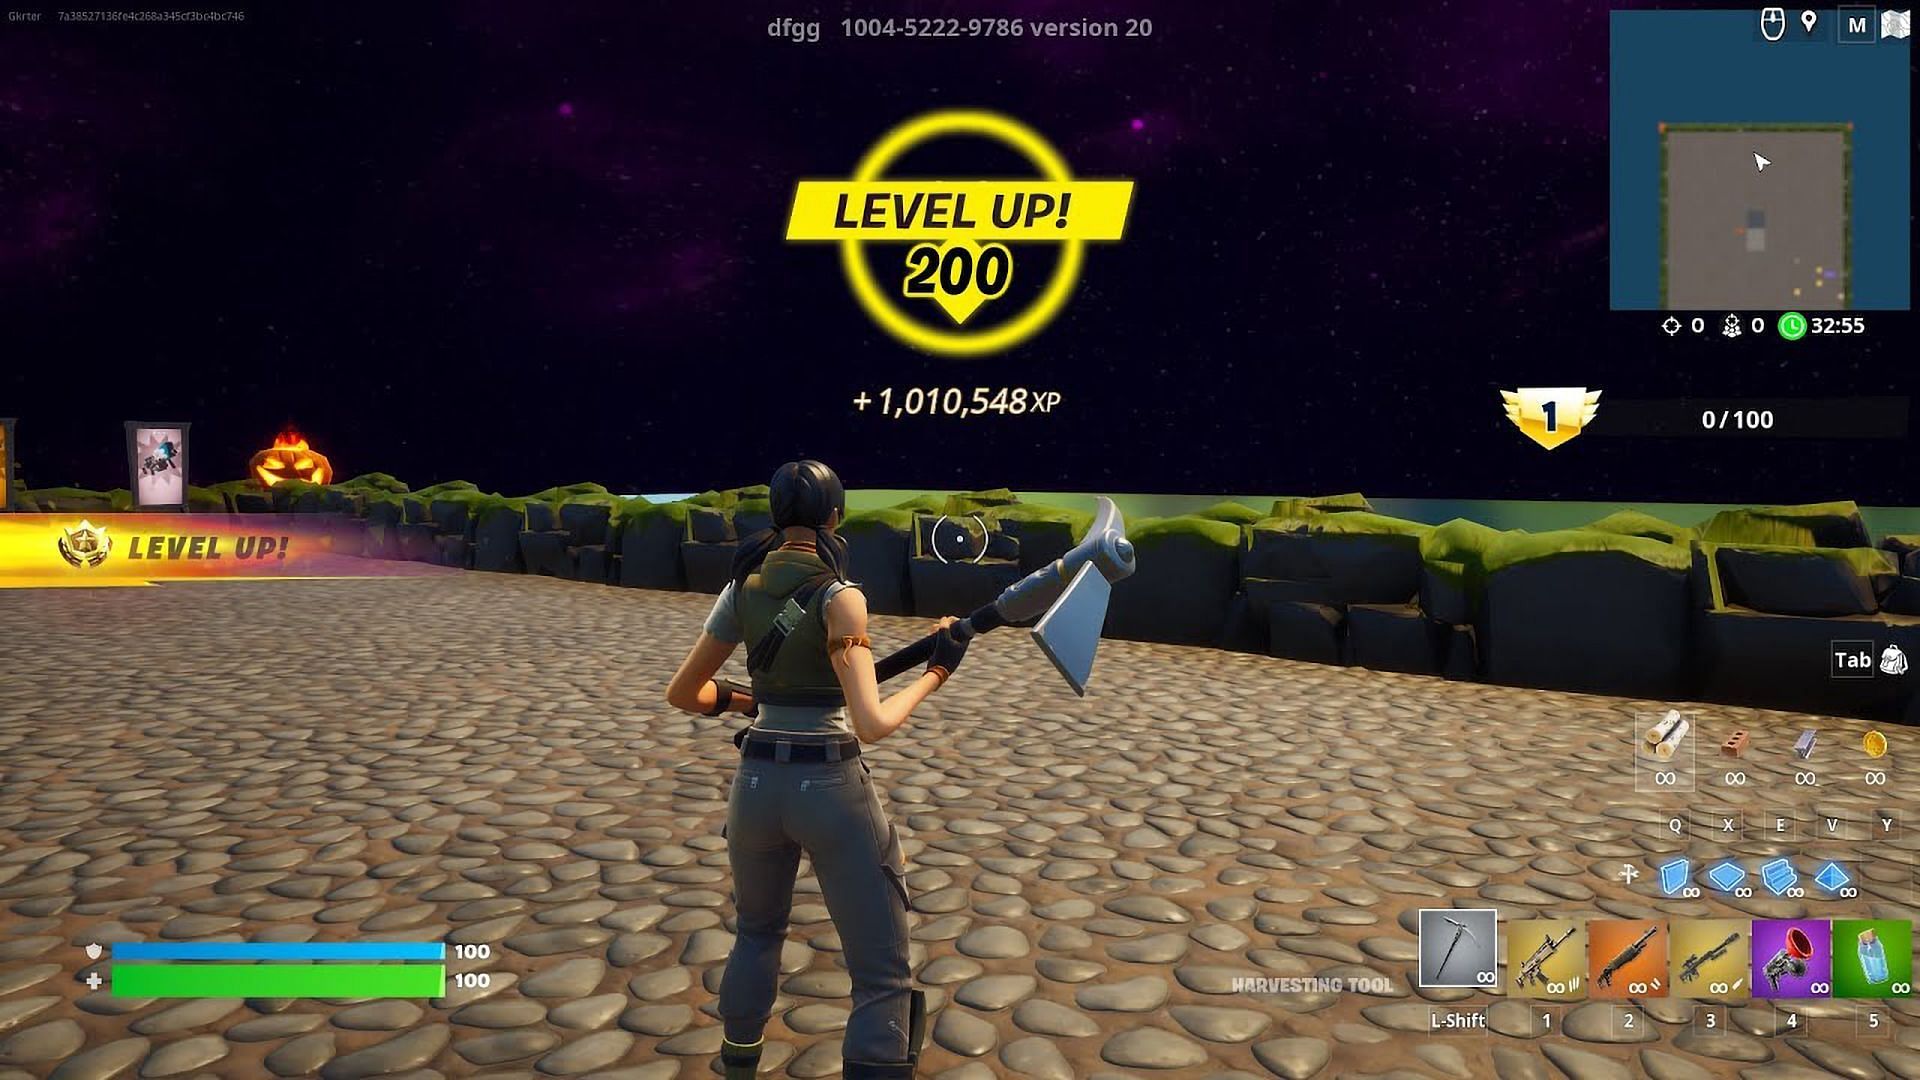 get to level 200 fast with this xp map #fortnite #xpmap